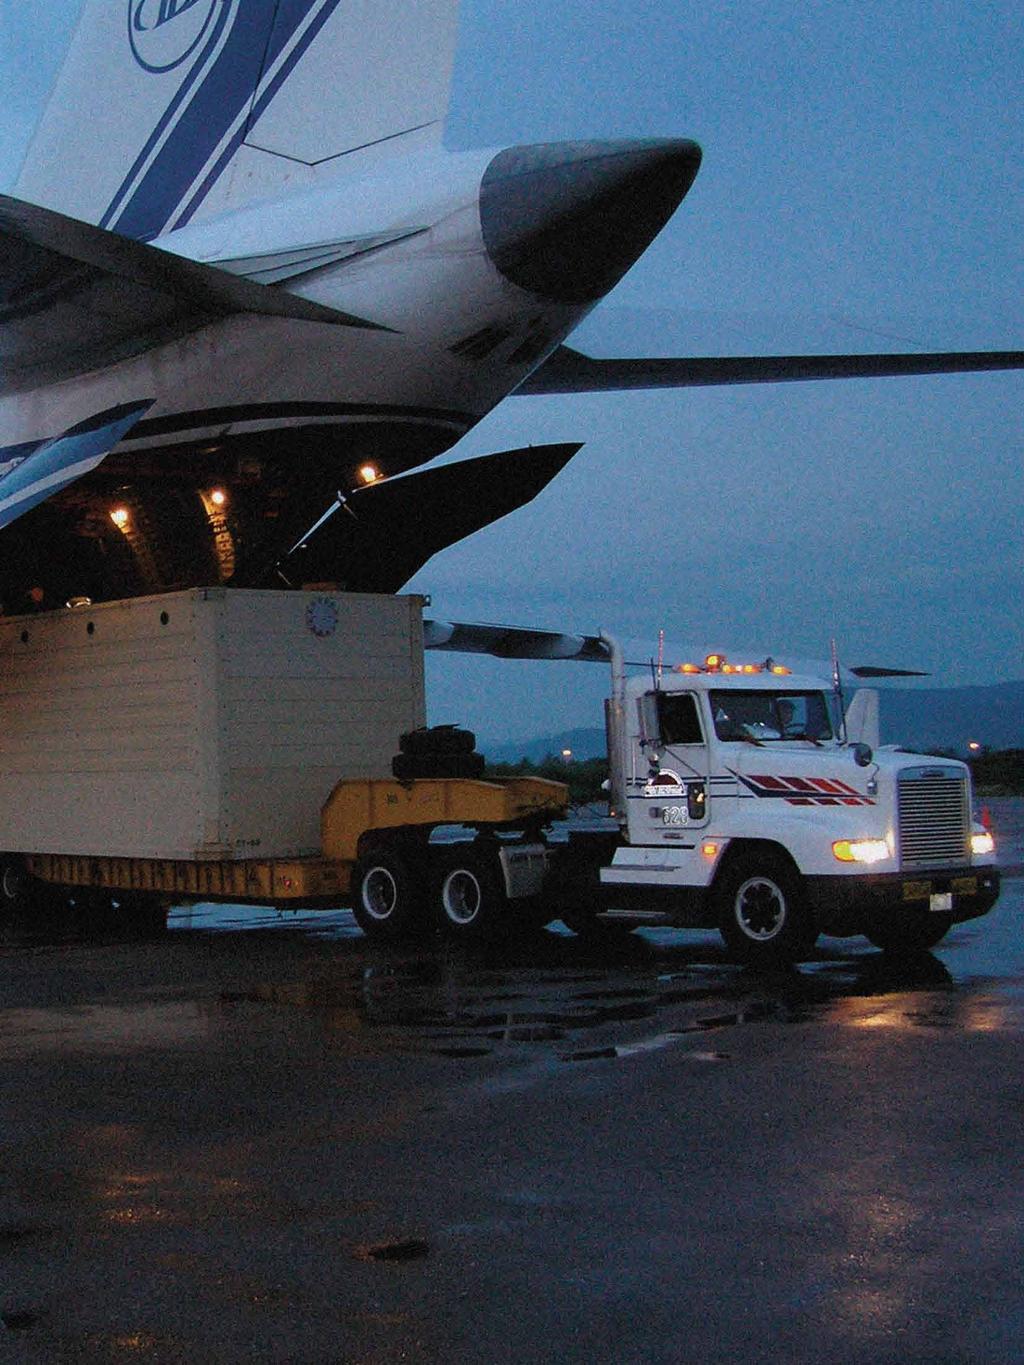 /Assistance/ Transporting cooling towers from the United States to Venezeula via an Antonov